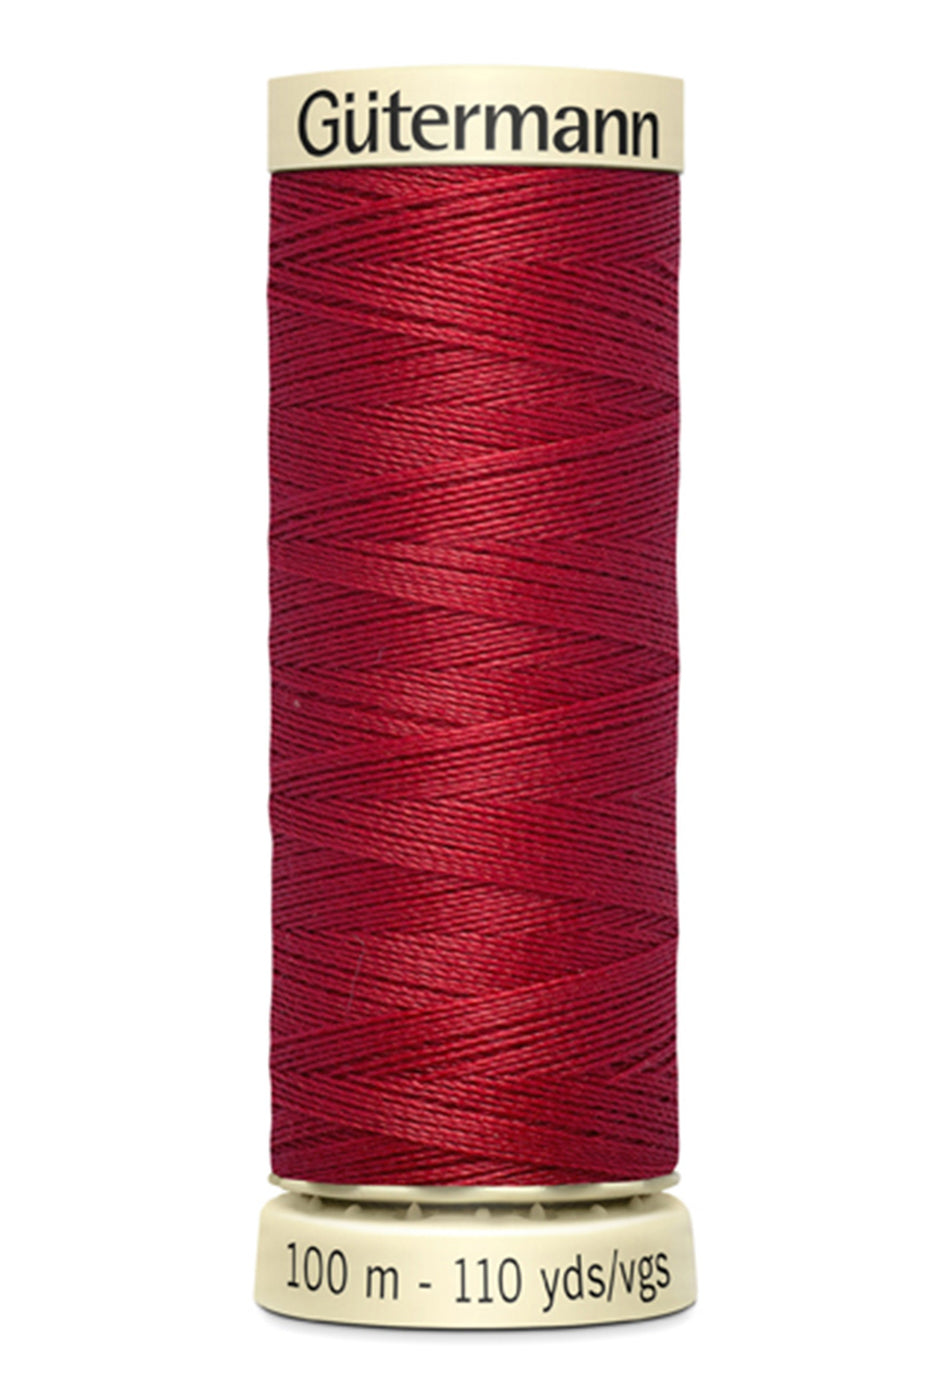 Gutermann Sew-All Polyester 420 Chili Red 100m/110yd